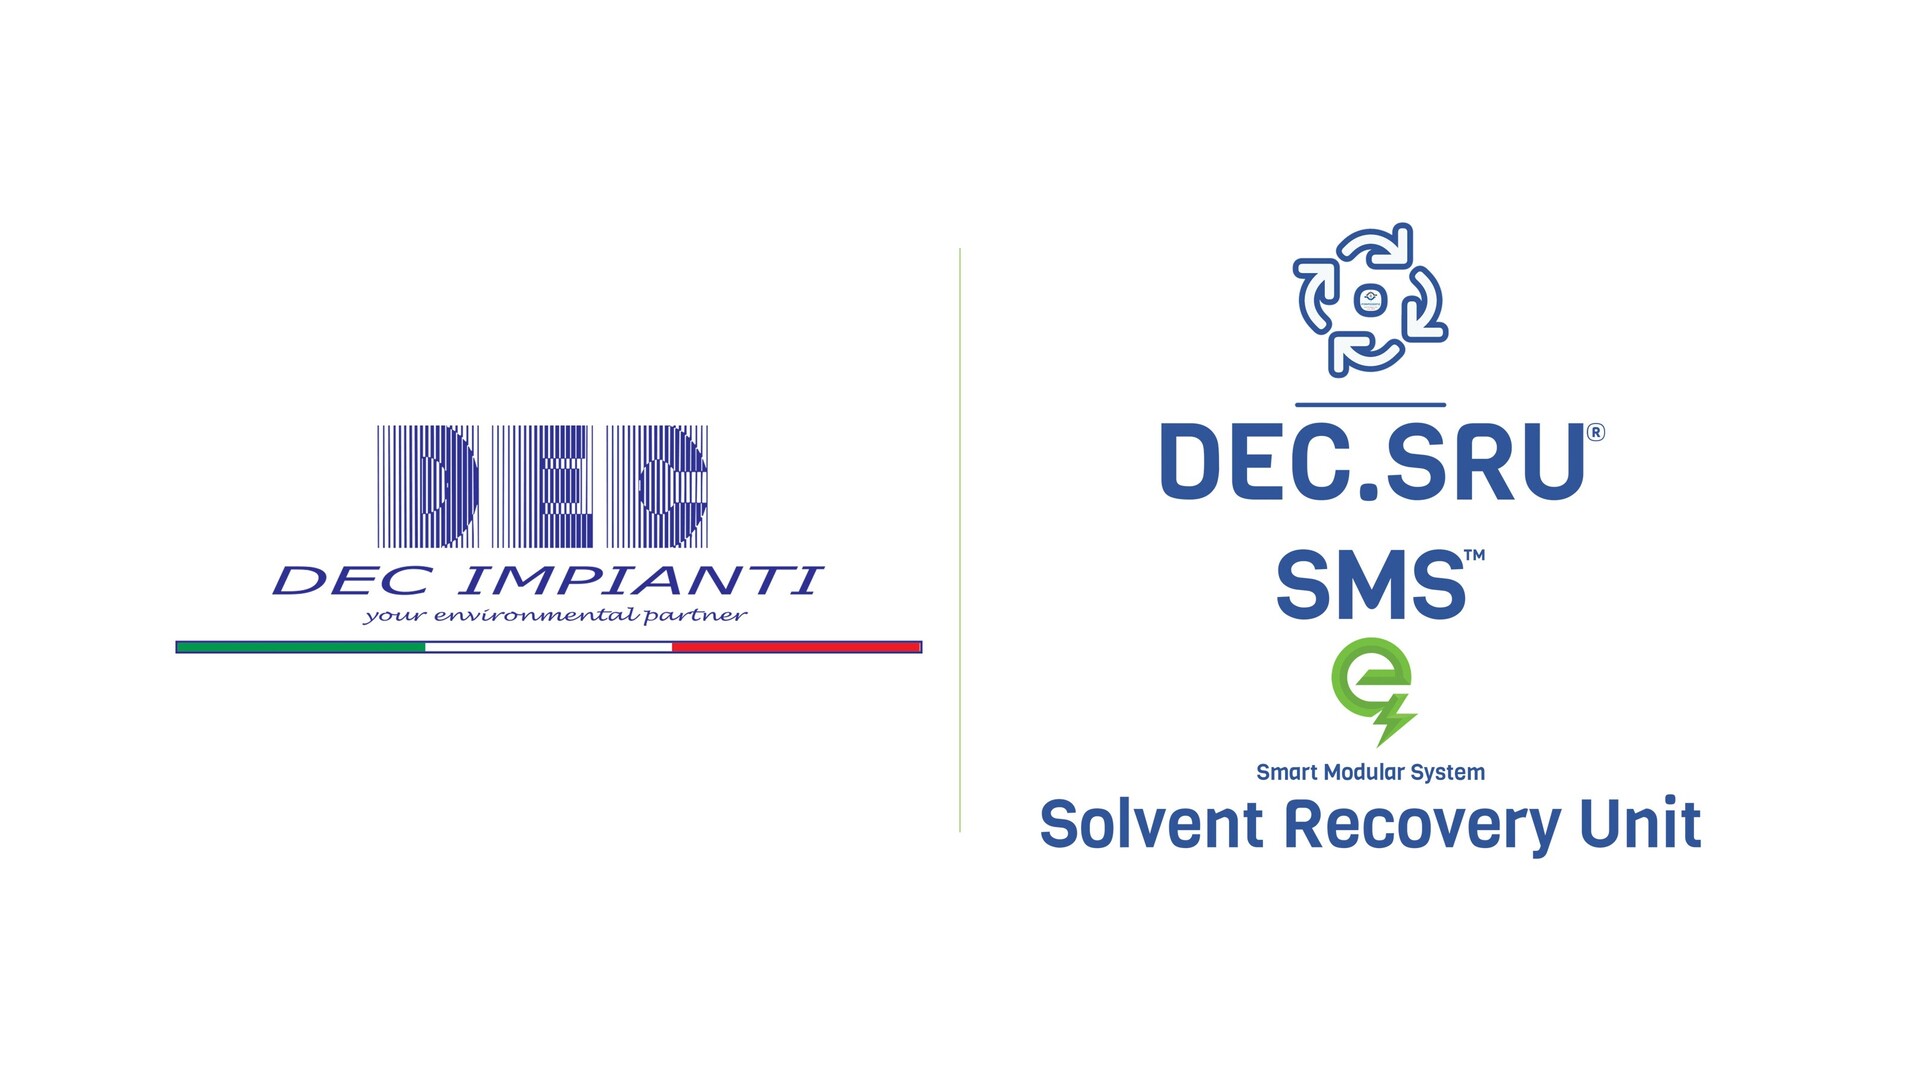 DEC, DEC IMPIANTI, DEC HOLDING, DEC SERVICE, DEC ENGINEERING, DEC AUTOMATION, DEC LAB, DEC ANALYTICS, DEC.SMS, SMS, SRU, Smart Modular System, VOC emission control, solvent recovery, VOC recovery, VOC abatement, VOC emission control technology, VOC abatement systems, air pollution control, solvent recovery systems, environmental compliance, VOC recovery system, solvent recovery unit, VOC recovery equipment, BAT, Best Available Technique, BREF, IED, Industrial Emissions Directive, solvent recovery equipment, solvent recycling, VOC capture, solvent reclamation, solvent purification, VOC treatment, solvent regeneration, distillation, solvent distillation, VOC recovery process, activated carbon, adsorbent, nitrogen, oxidizer, thermal oxidation, regenerative thermal oxidizer, LEL monitoring, solvent recovery for flexible packaging, flexible packaging, converting, engineering, supply, turnkey, sustainable, innovation, decarbonization, low carbon emissions, green deal, carbon reduction, low carbon, carbon neutrality, net-zero emissions, greenhouse gas mitigation, carbon footprint, carbon capture and storage (CCS), GHG, CO2, energy efficiency, chemical recycling, recycling, sustainability solutions, sustainability, reclaiming, carbon offset, circular economy, climate change, climate policy, climate action, environmental challenges, sustainable development, sustainability roadmap, ESG, TBL